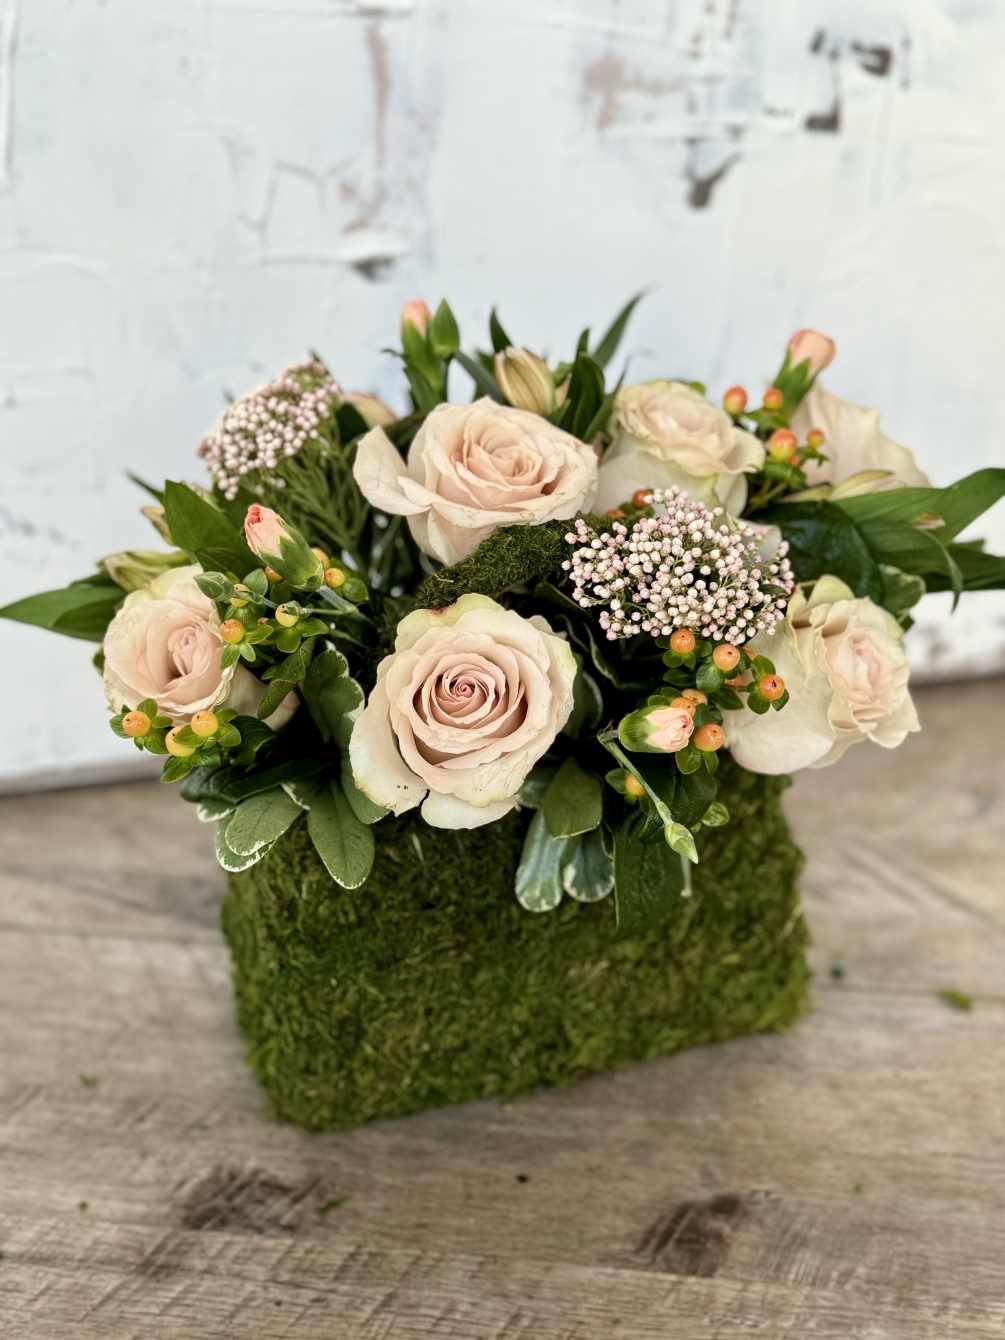 Crafted within a charming moss purse, this floral arrangement exudes grace and